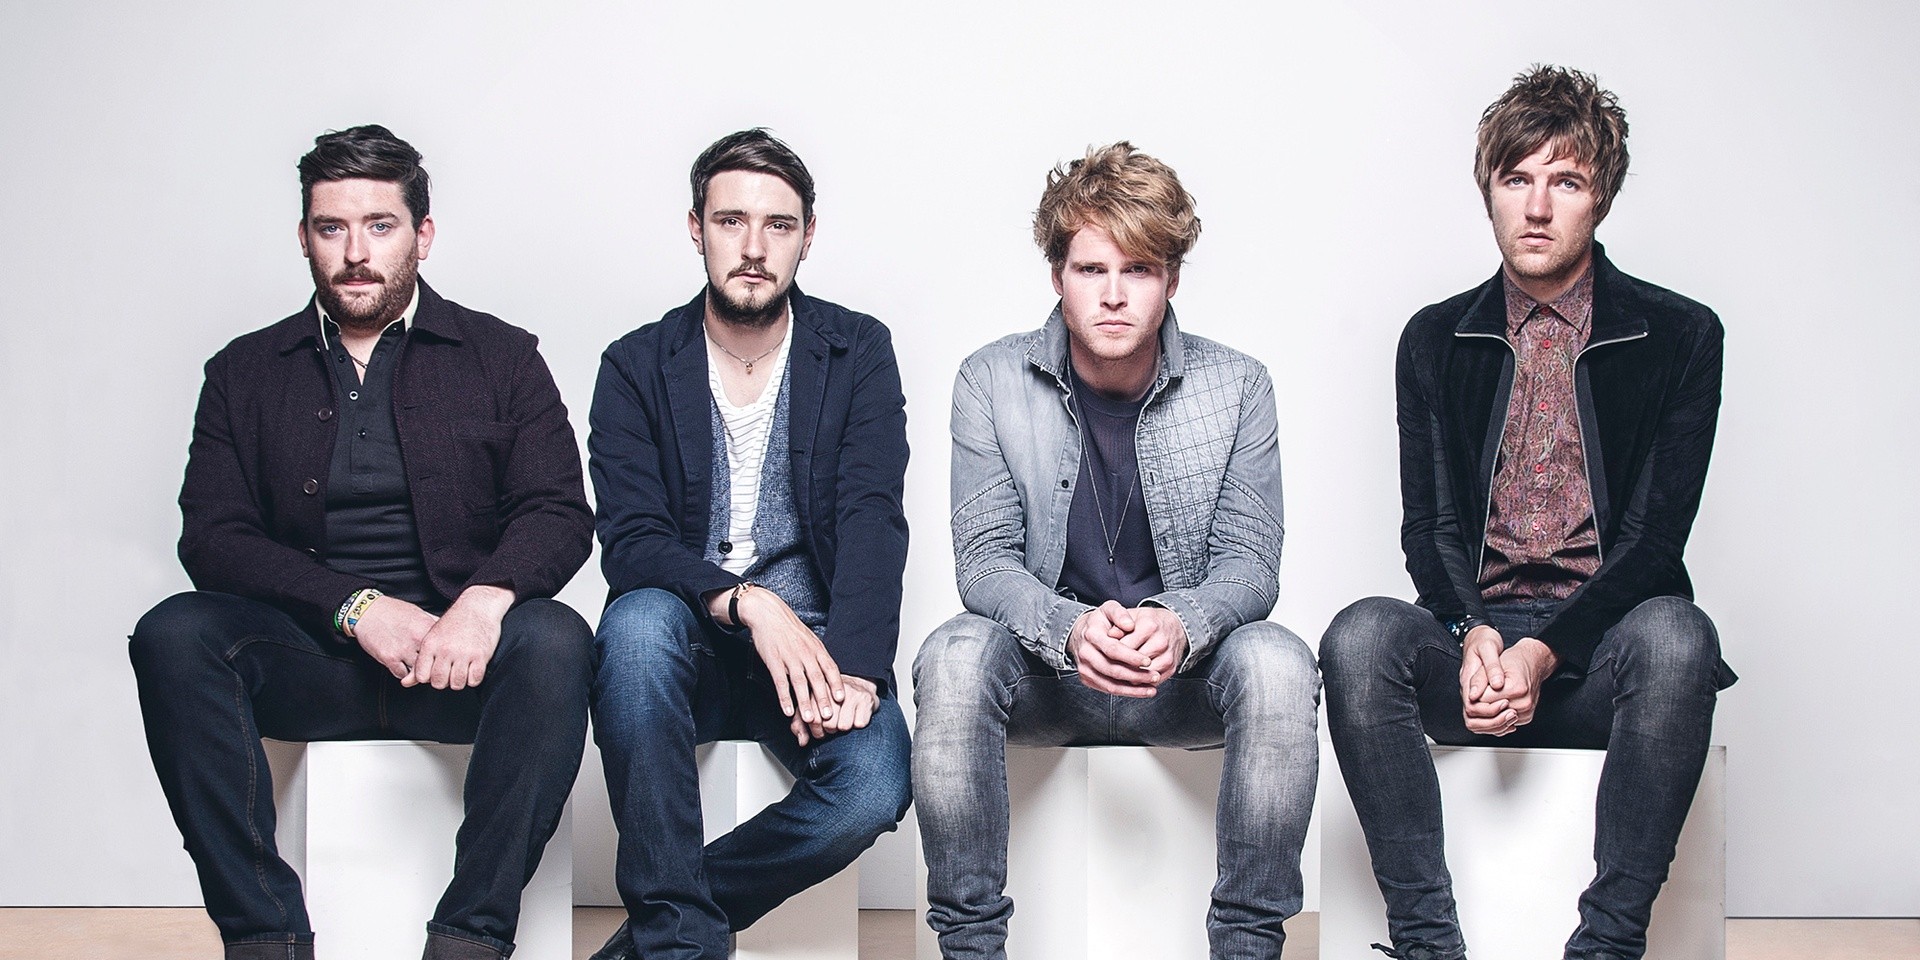 Kodaline respond to fan questions about touring, songwriting and more